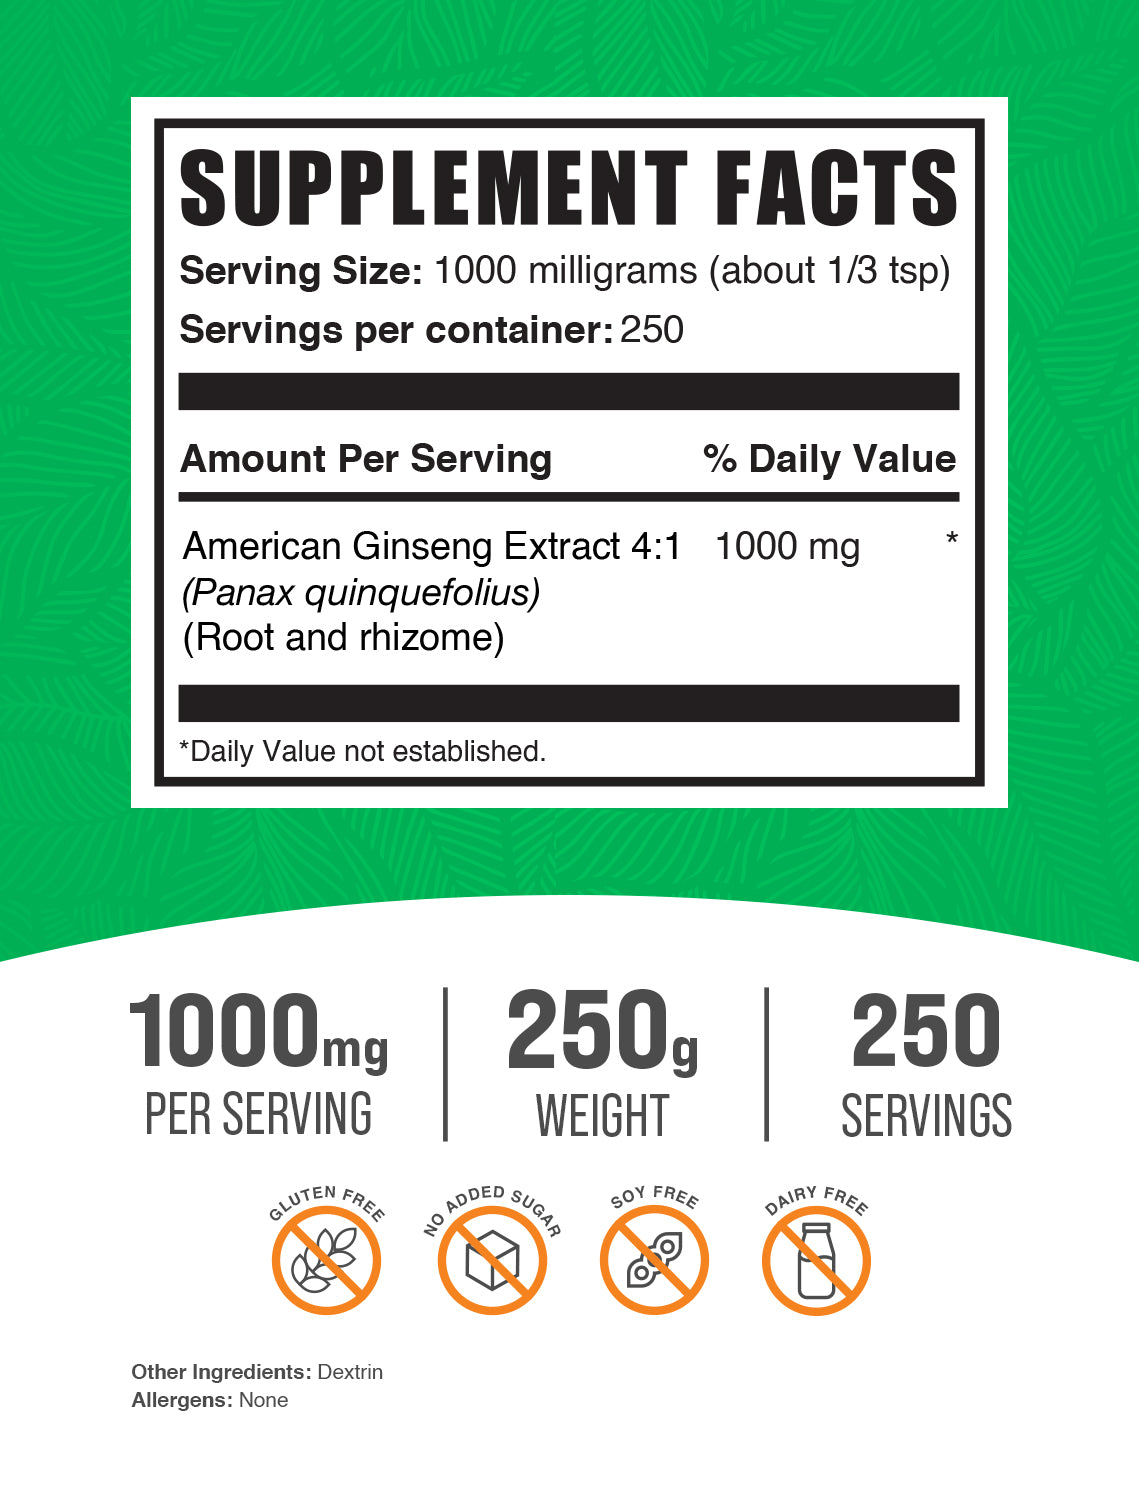 American Ginseng Extract powder label 250g